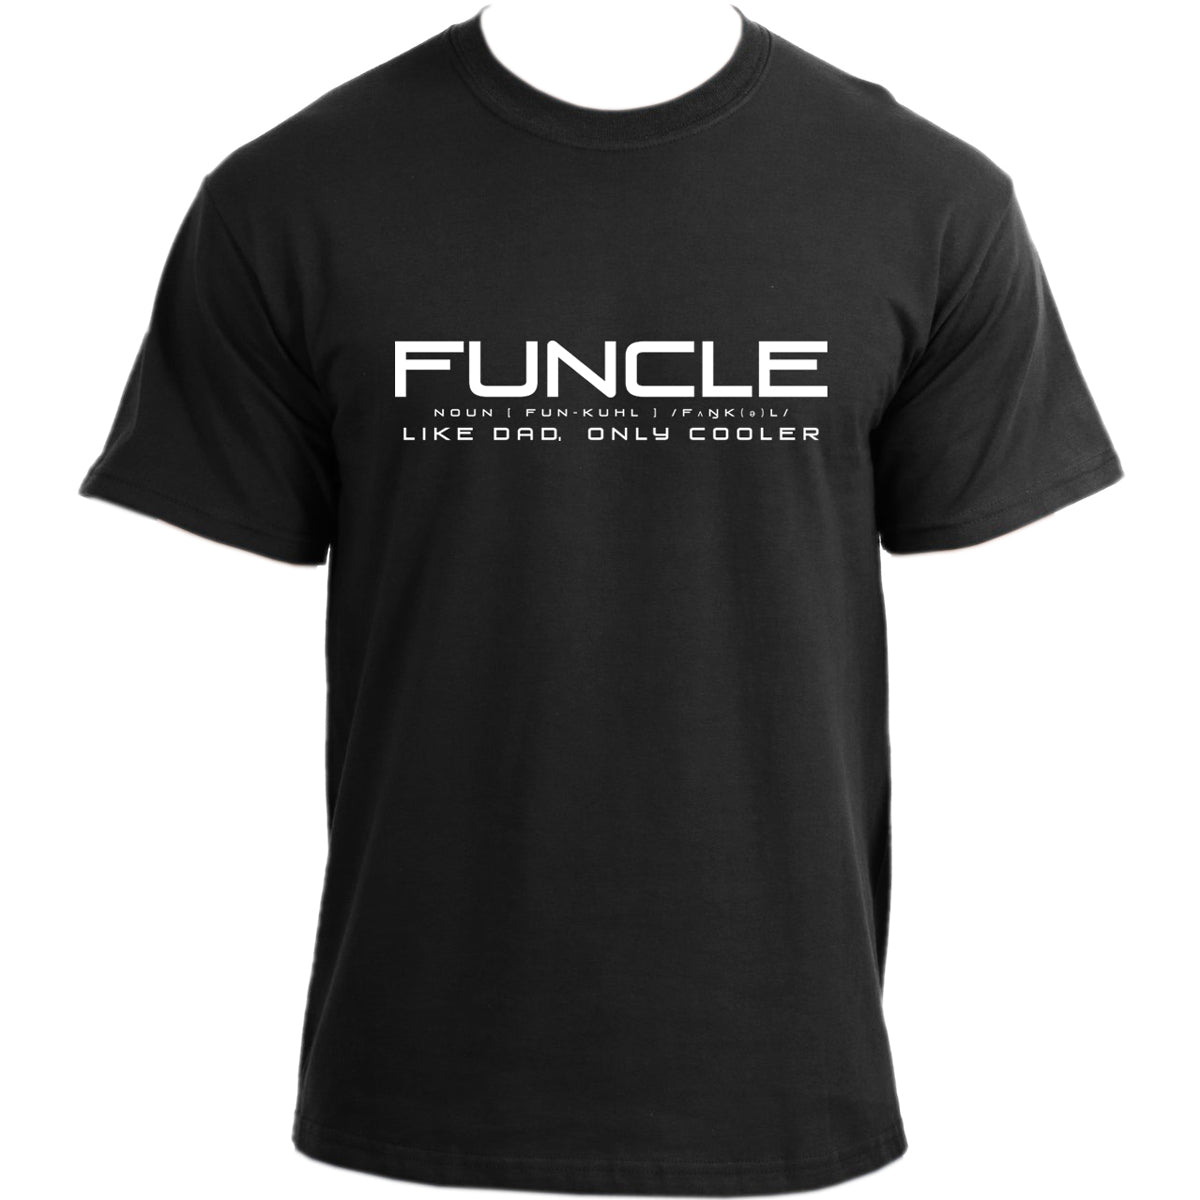 Funcle Uncle T Shirt I Cool Uncle Tshirt I Novelty Humor Very Funny Uncle T-shirt